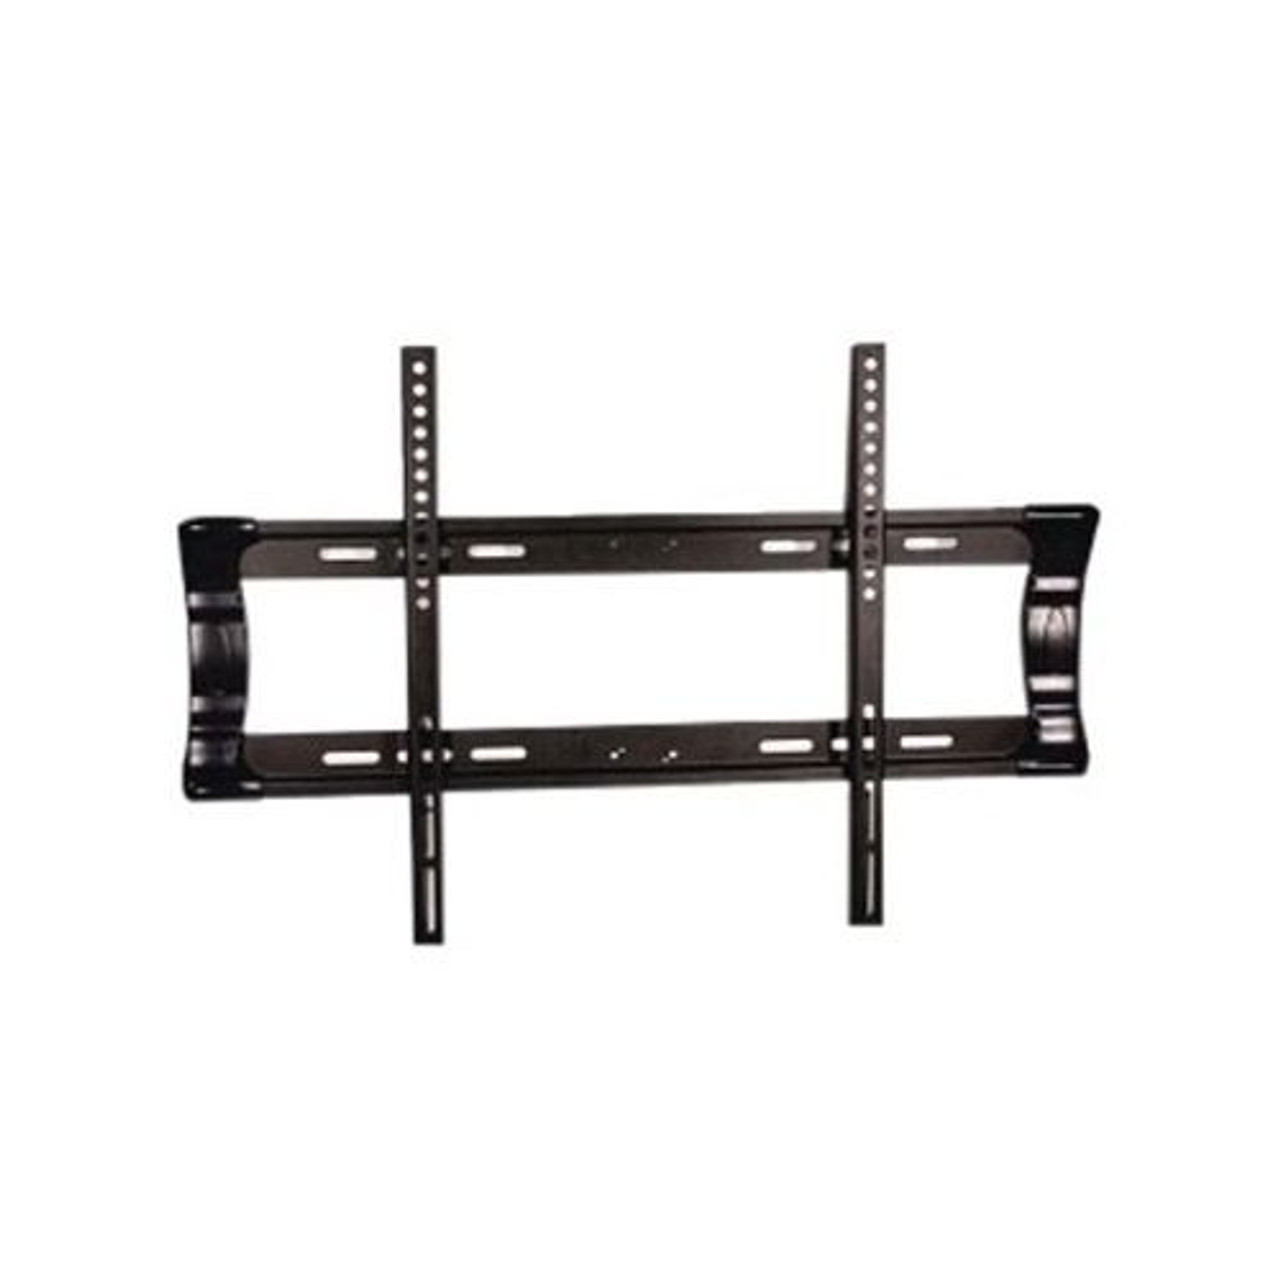 Sequence 720-010 Medium Flat Panel TV Wall Mount Rated Load 132 Lbs for TVs From 26" to 55" Low Profile Fixed Panel by Steren